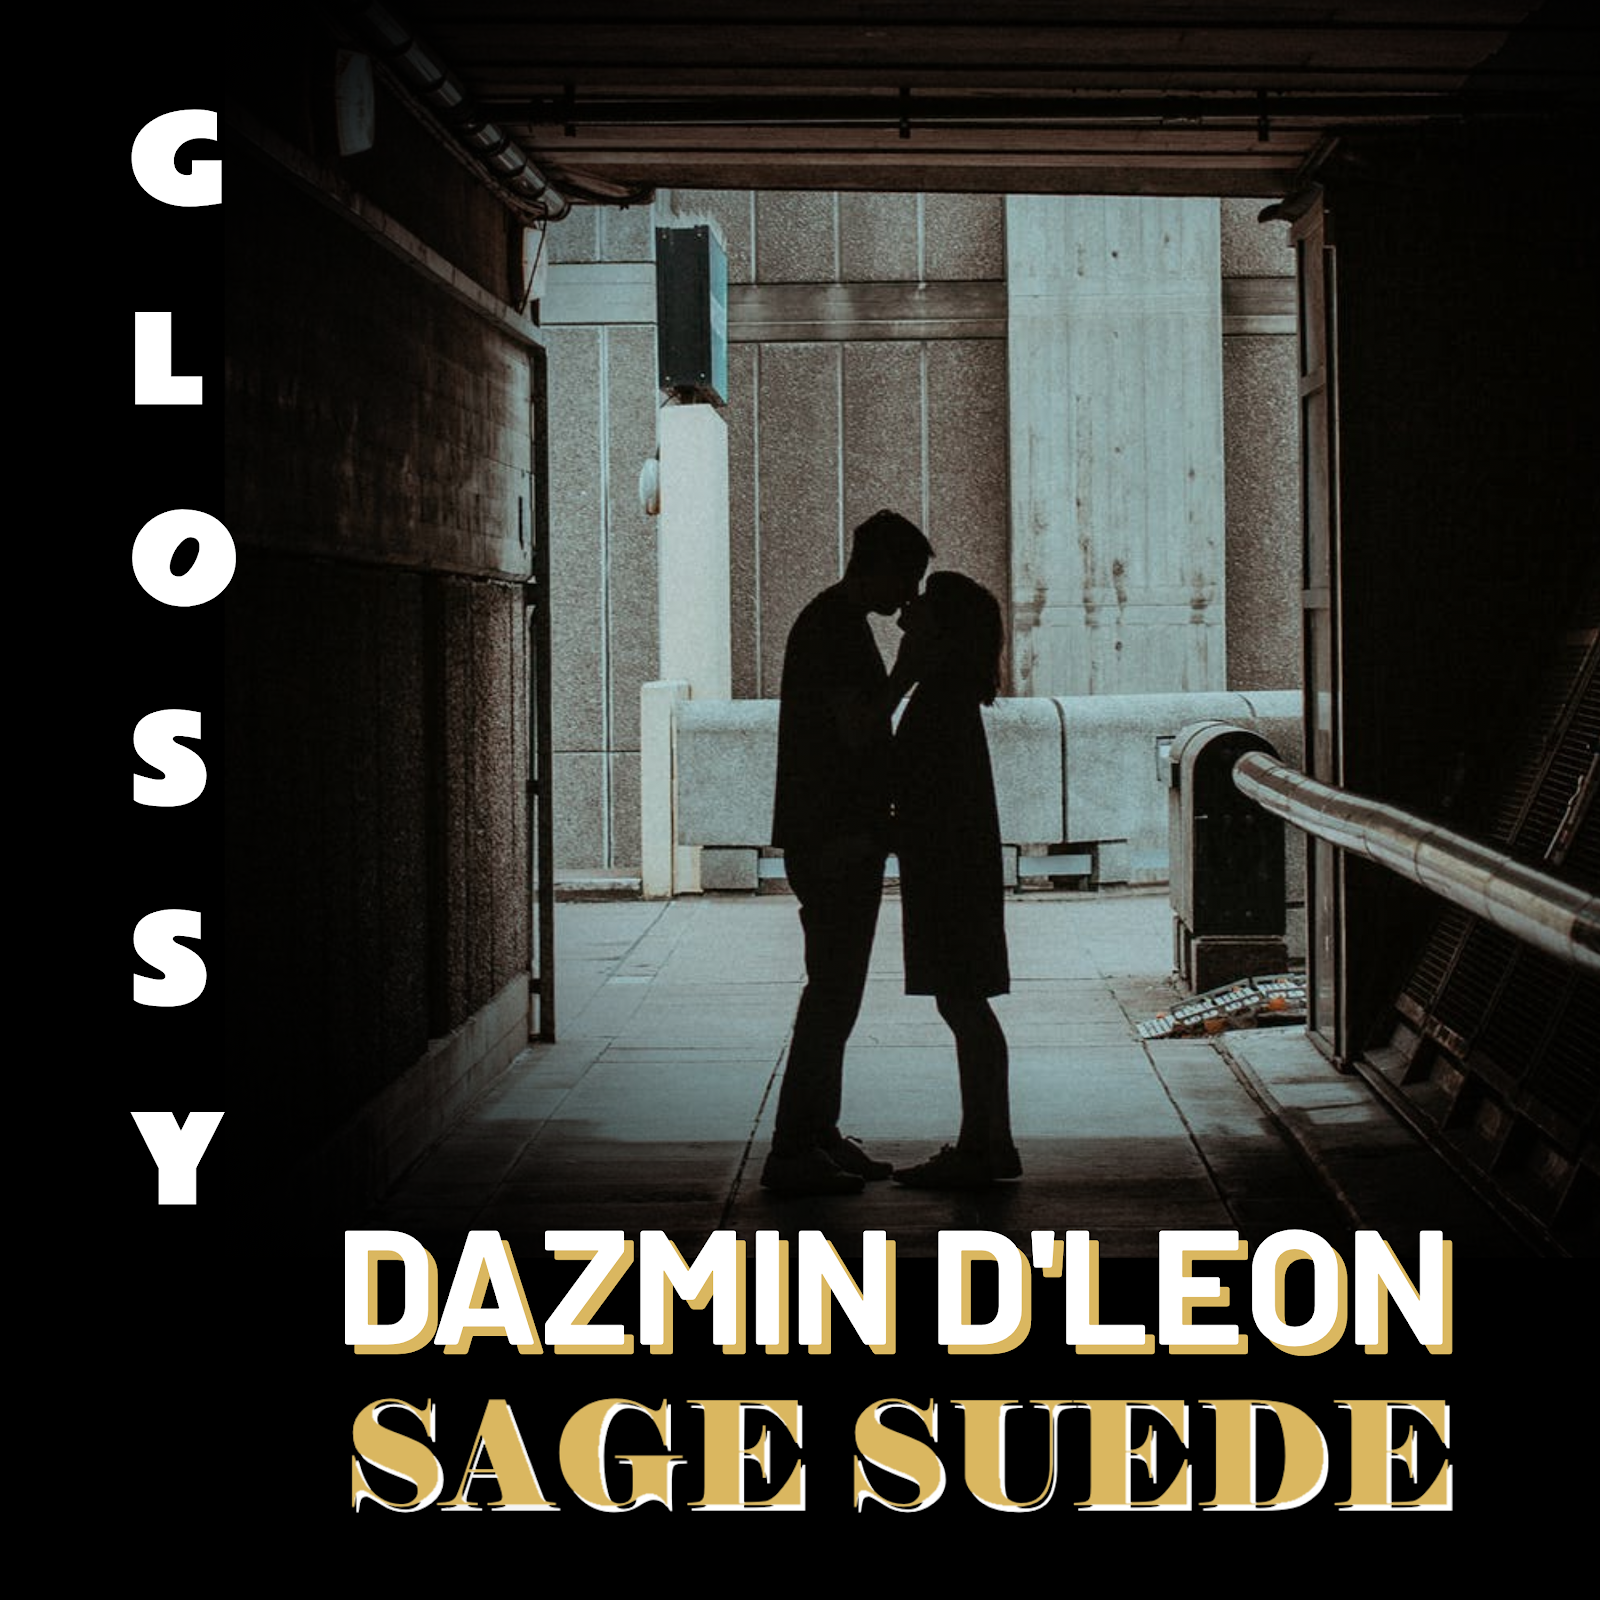 Meet The New Power Duo, Sage Suede And Dazmin D’Leon, With New EP Titled Glossy